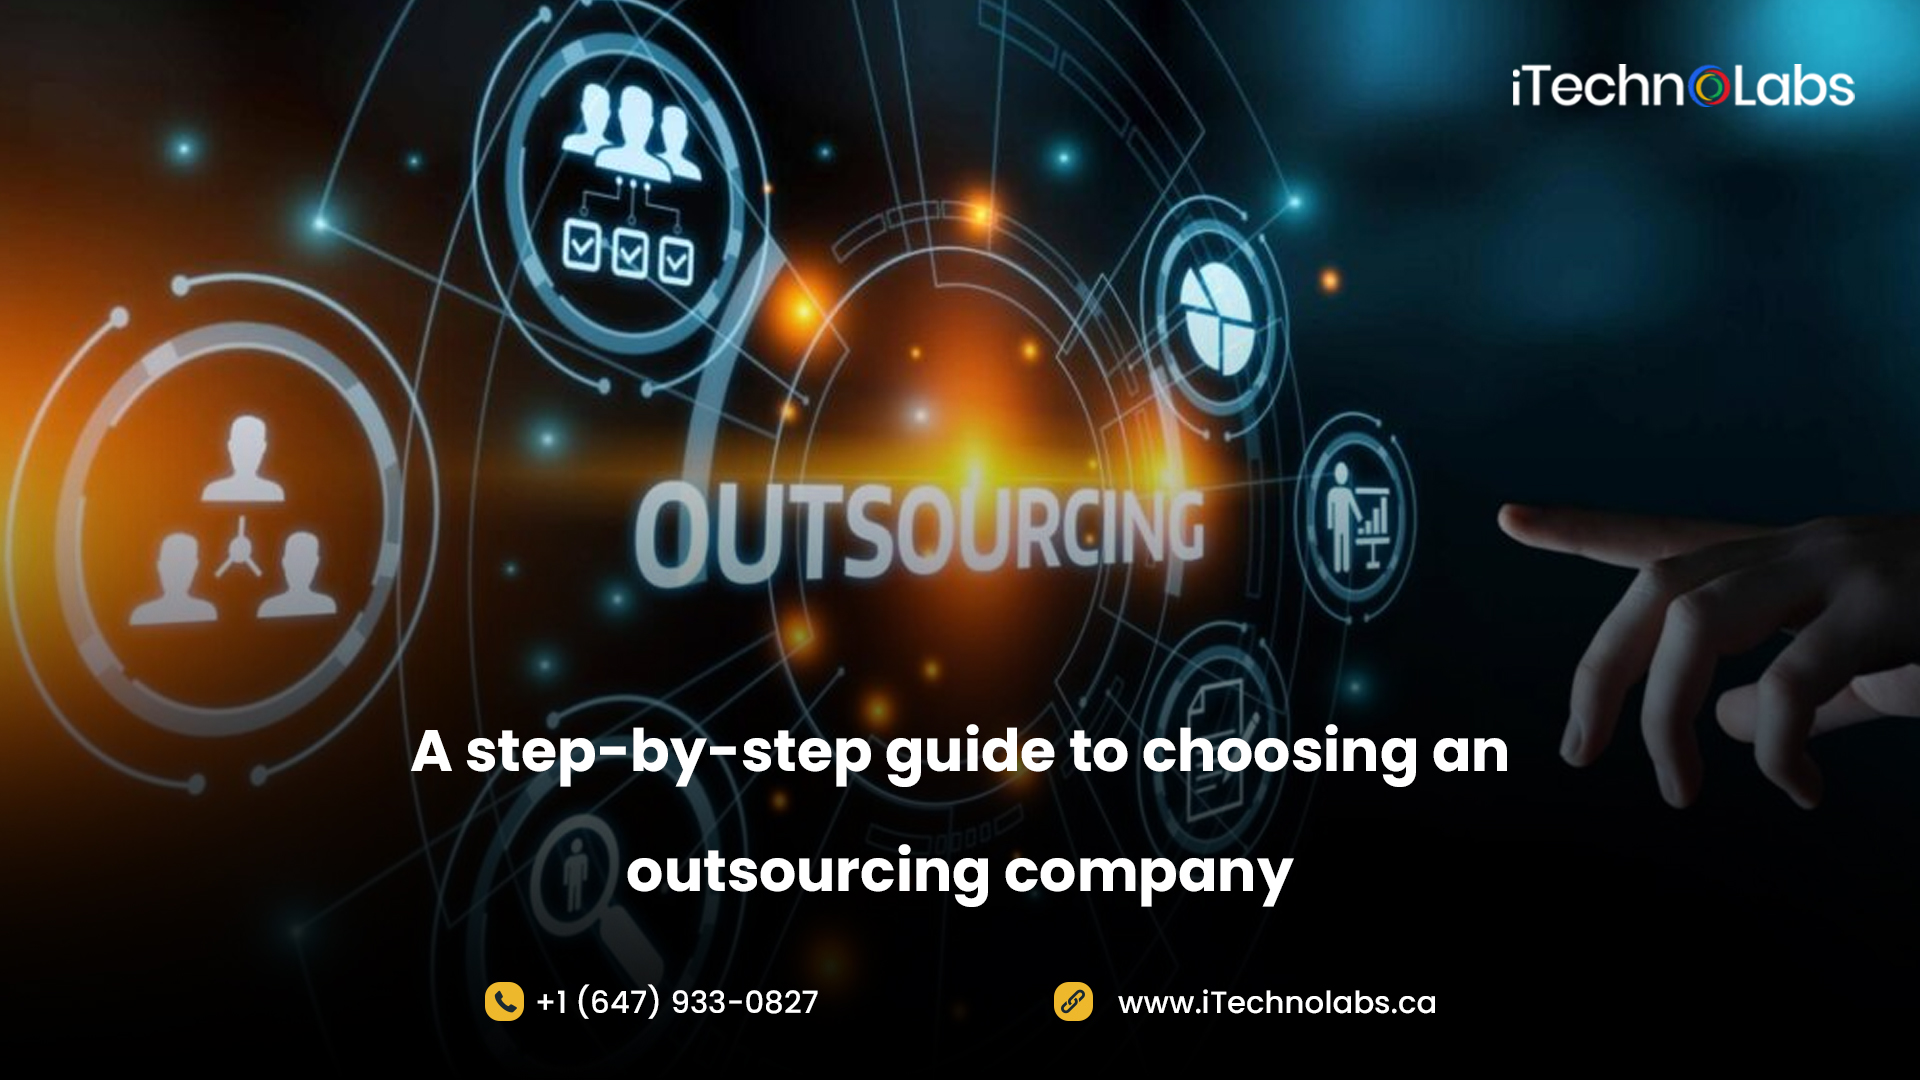 A-step-by-step-guide-to-choosing-an-outsourcing-company-itechnolabs